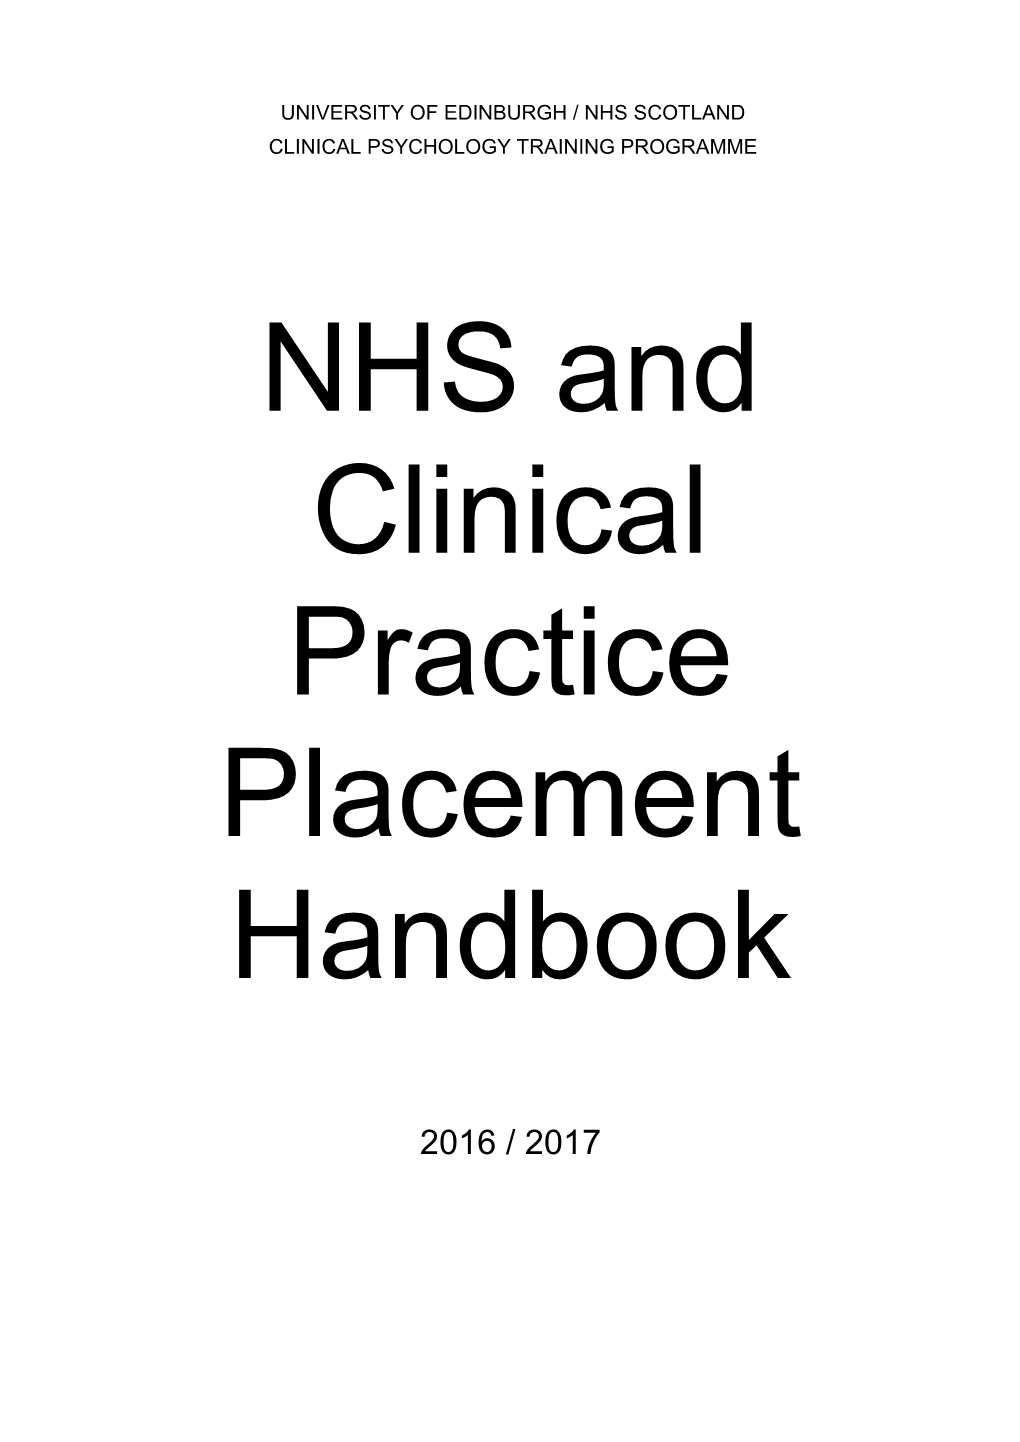 NHS and Clinical Practice Placement Handbook